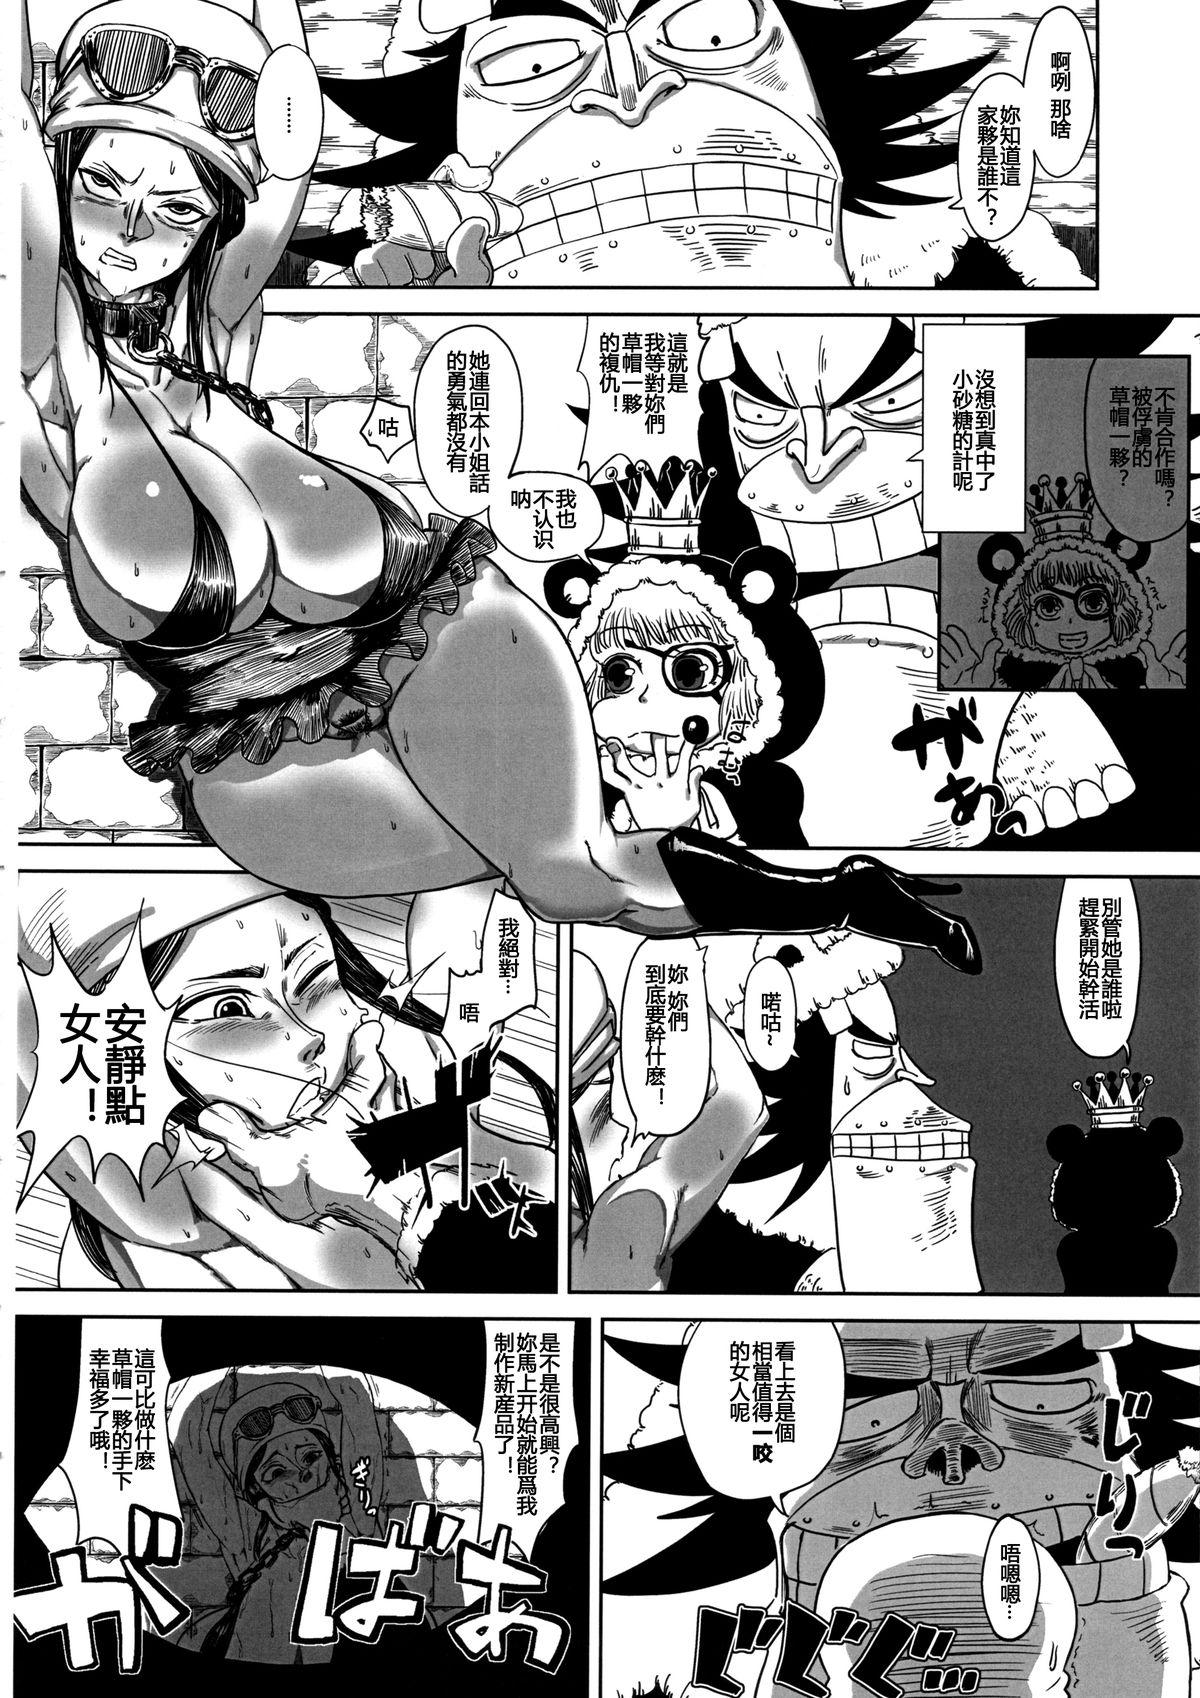 Ejaculations Robi Ana - One piece Gay Pissing - Page 5